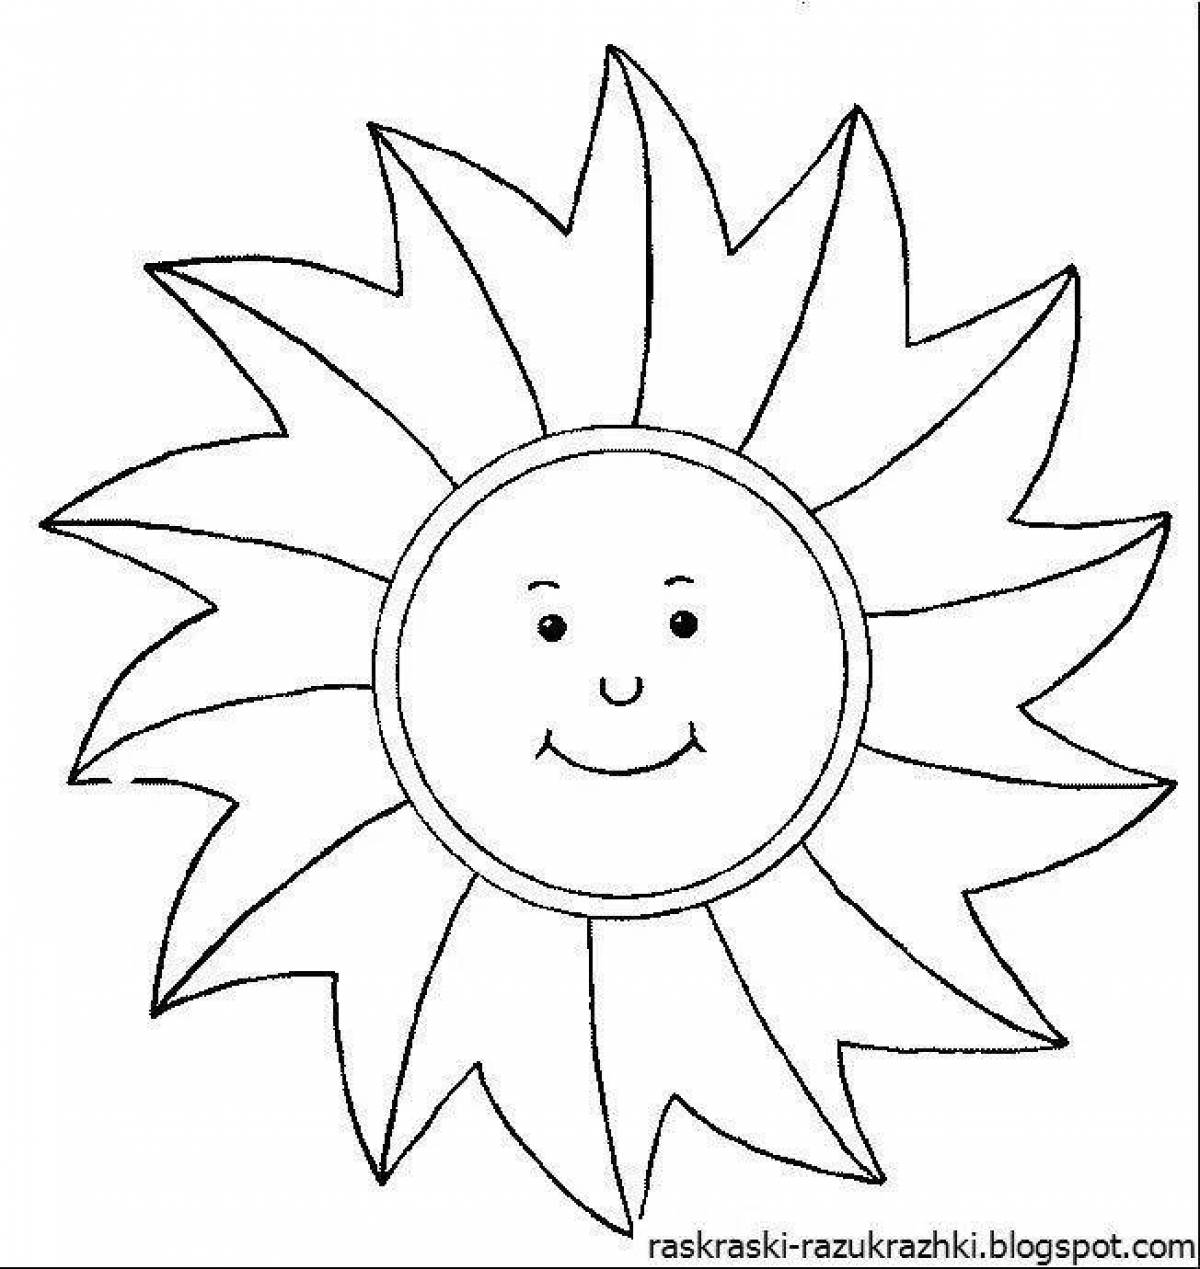 Intriguing sun coloring book for kids 2-3 years old